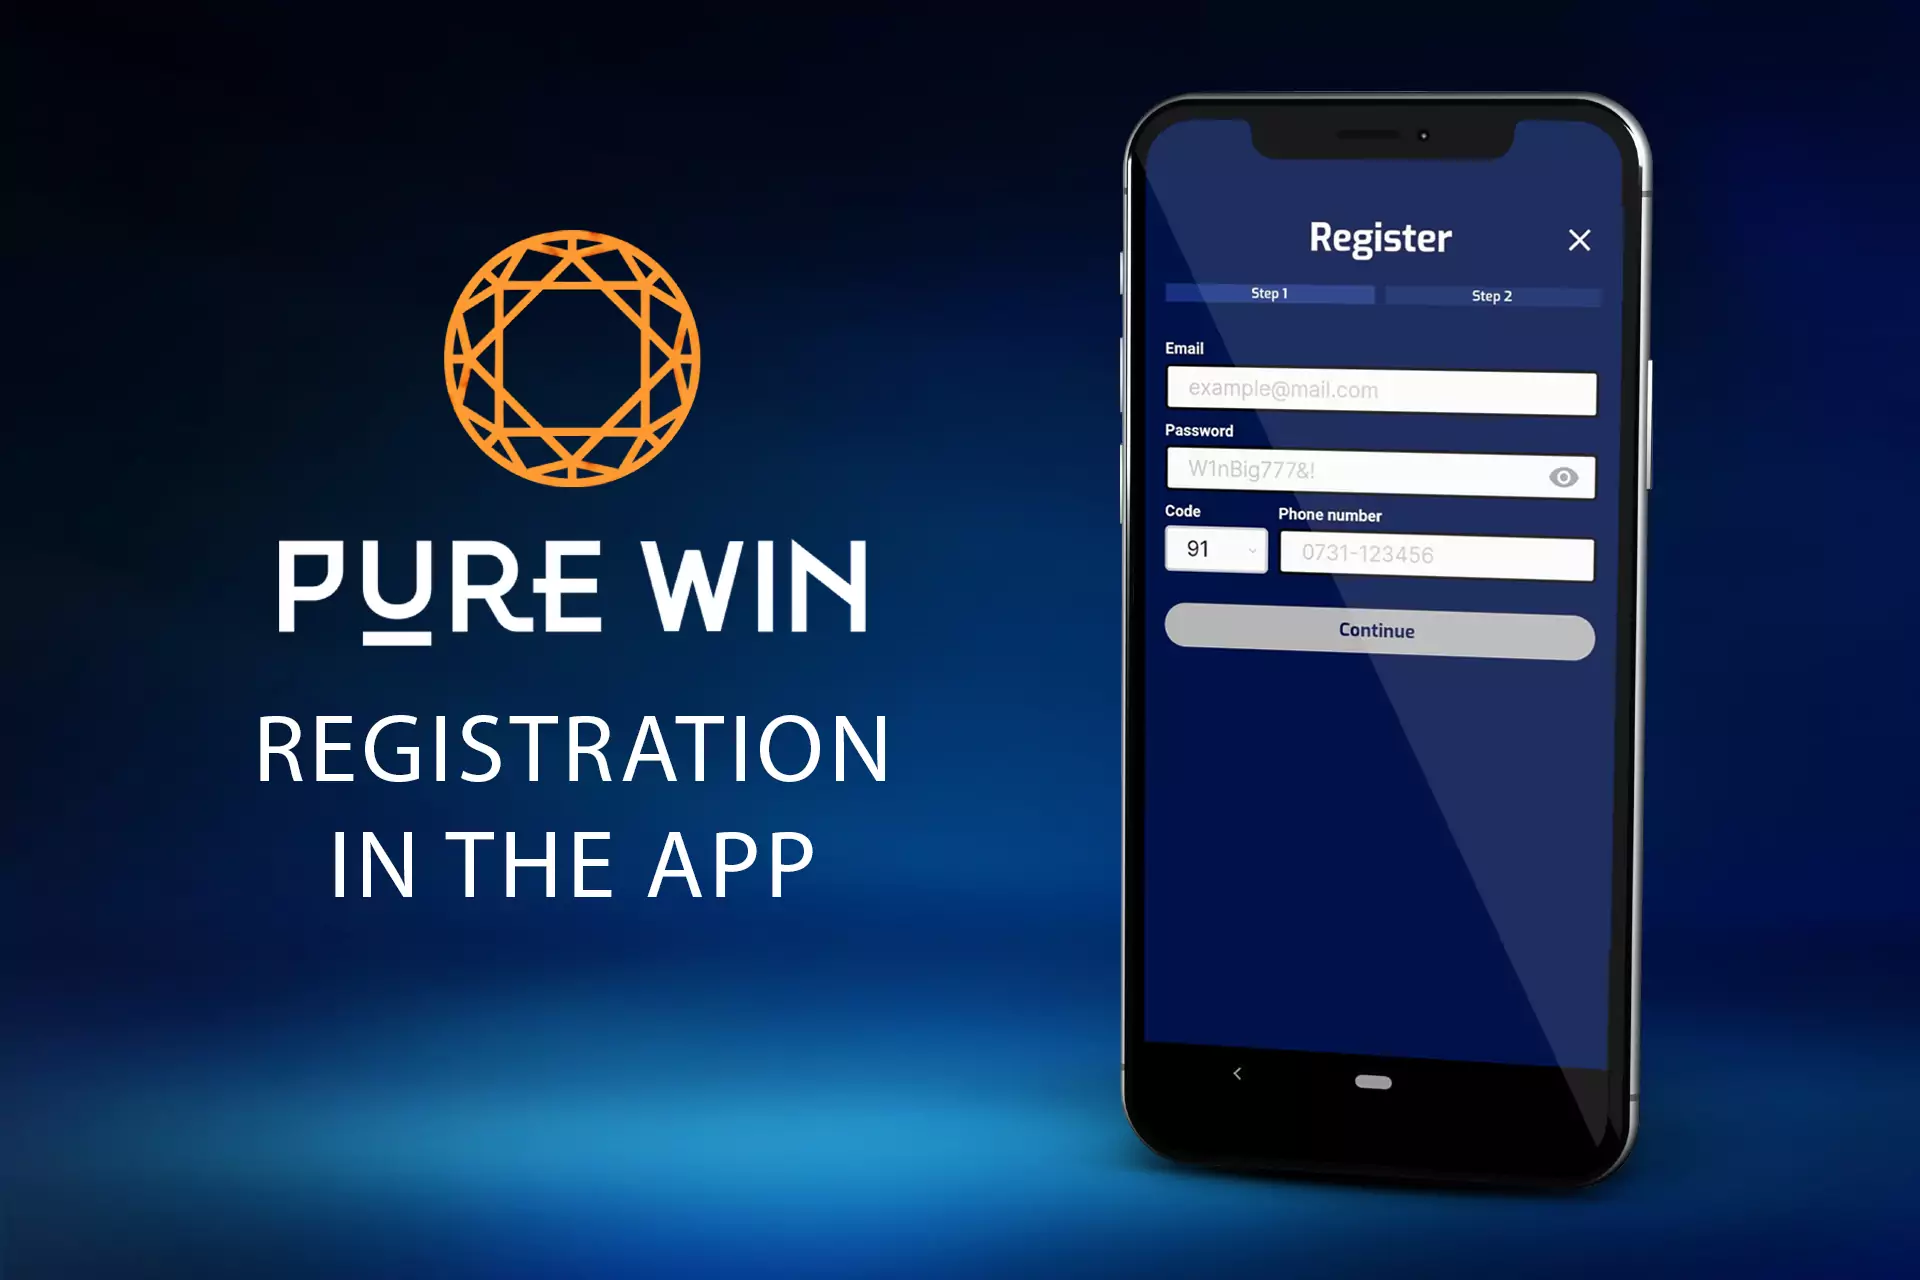 Run the app to create a new betting account.